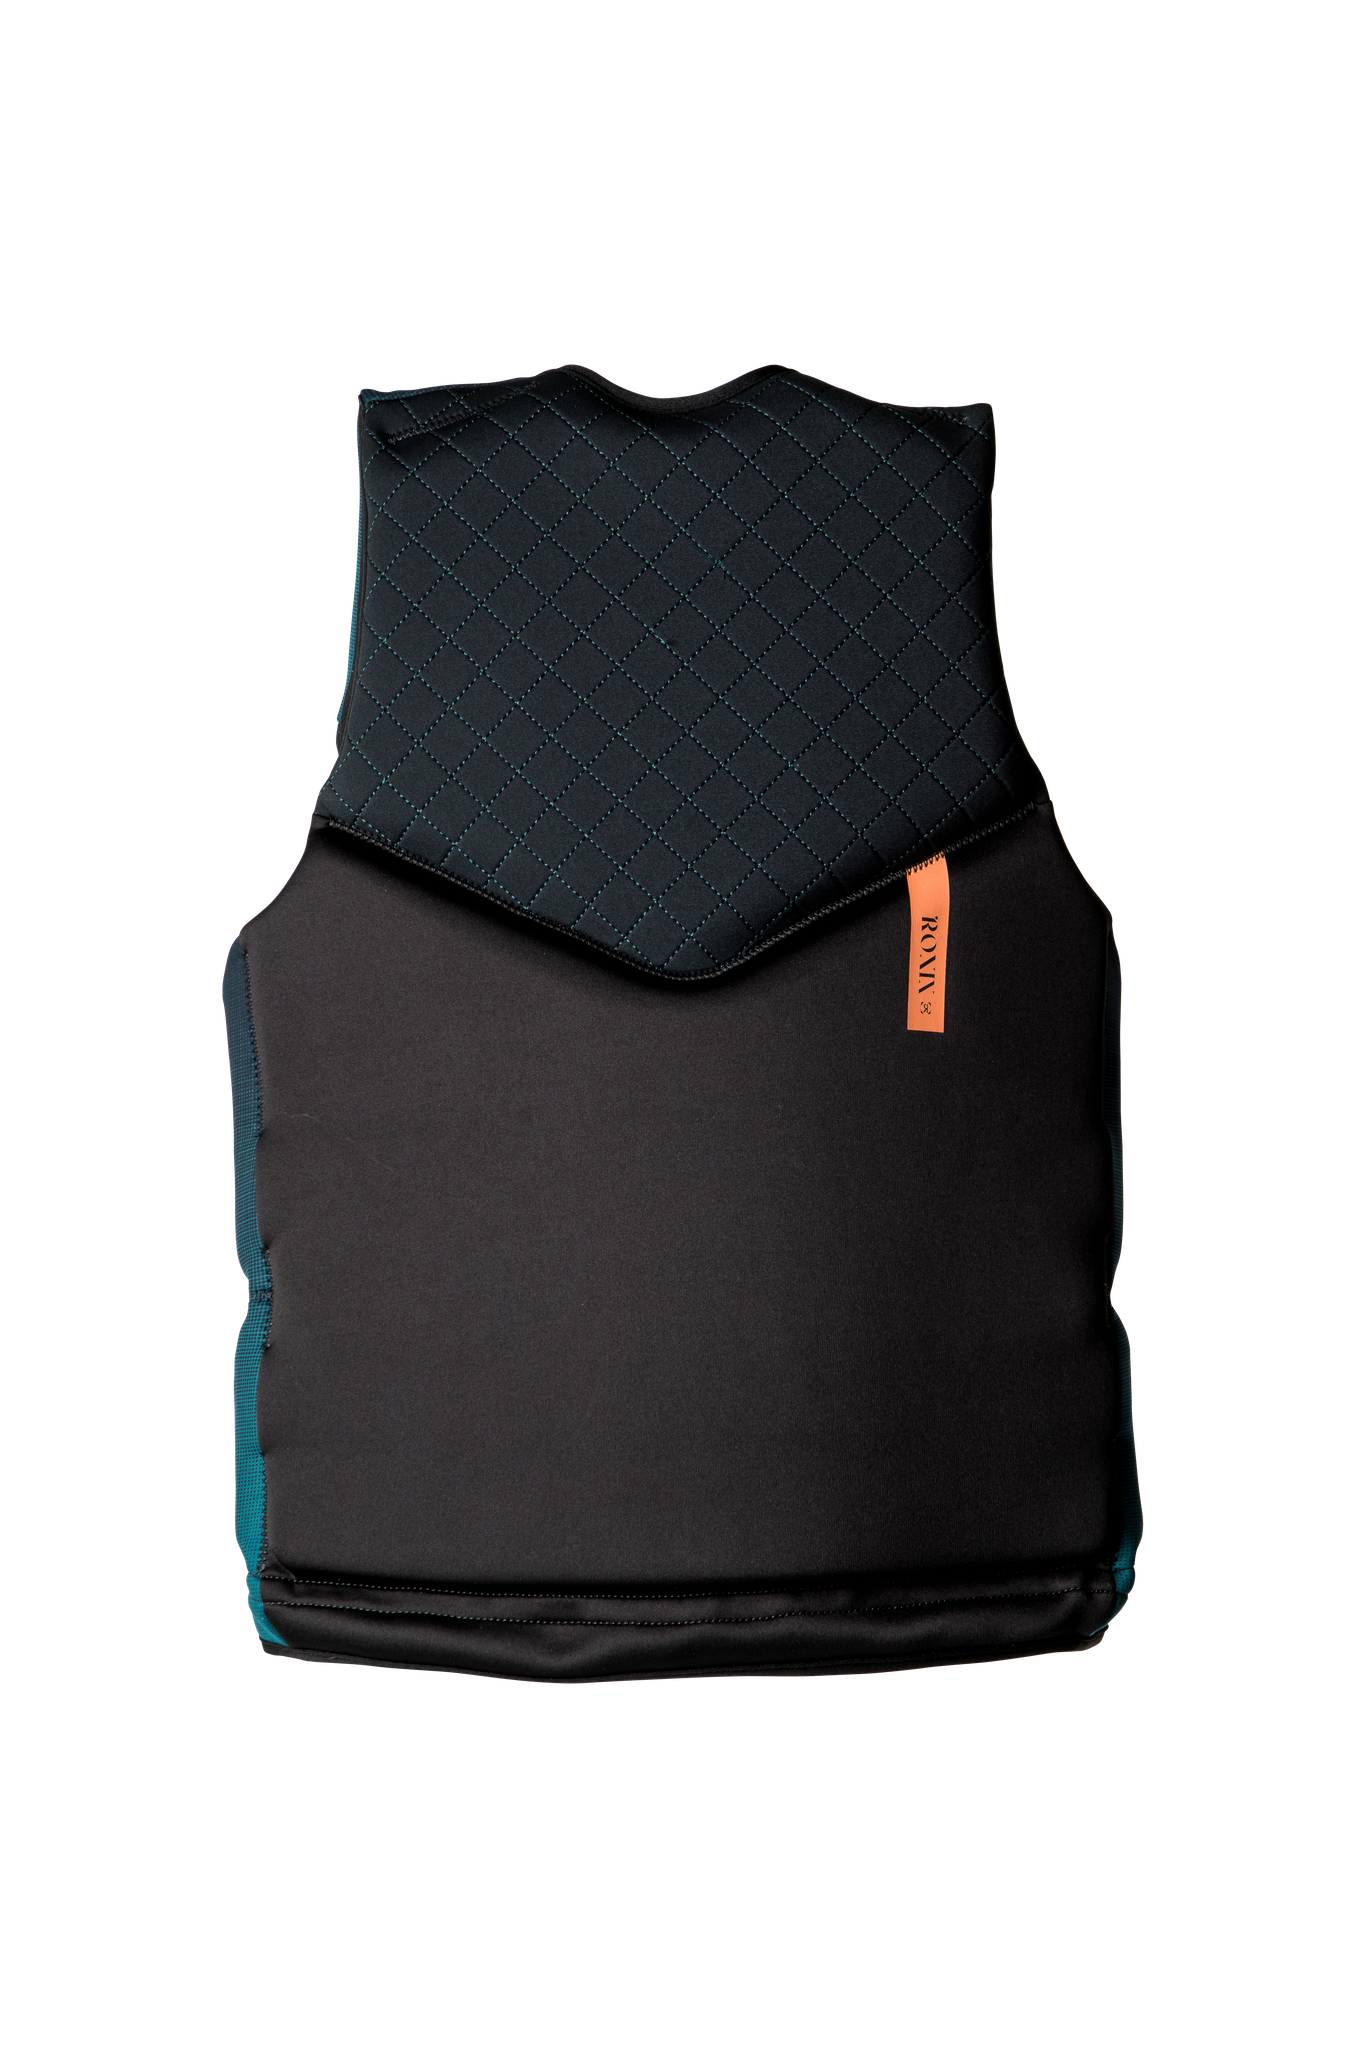 A water resistant life vest in black and orange, Ronix Women's Imperial Capella 3.0 CGA Vest, on a black background.